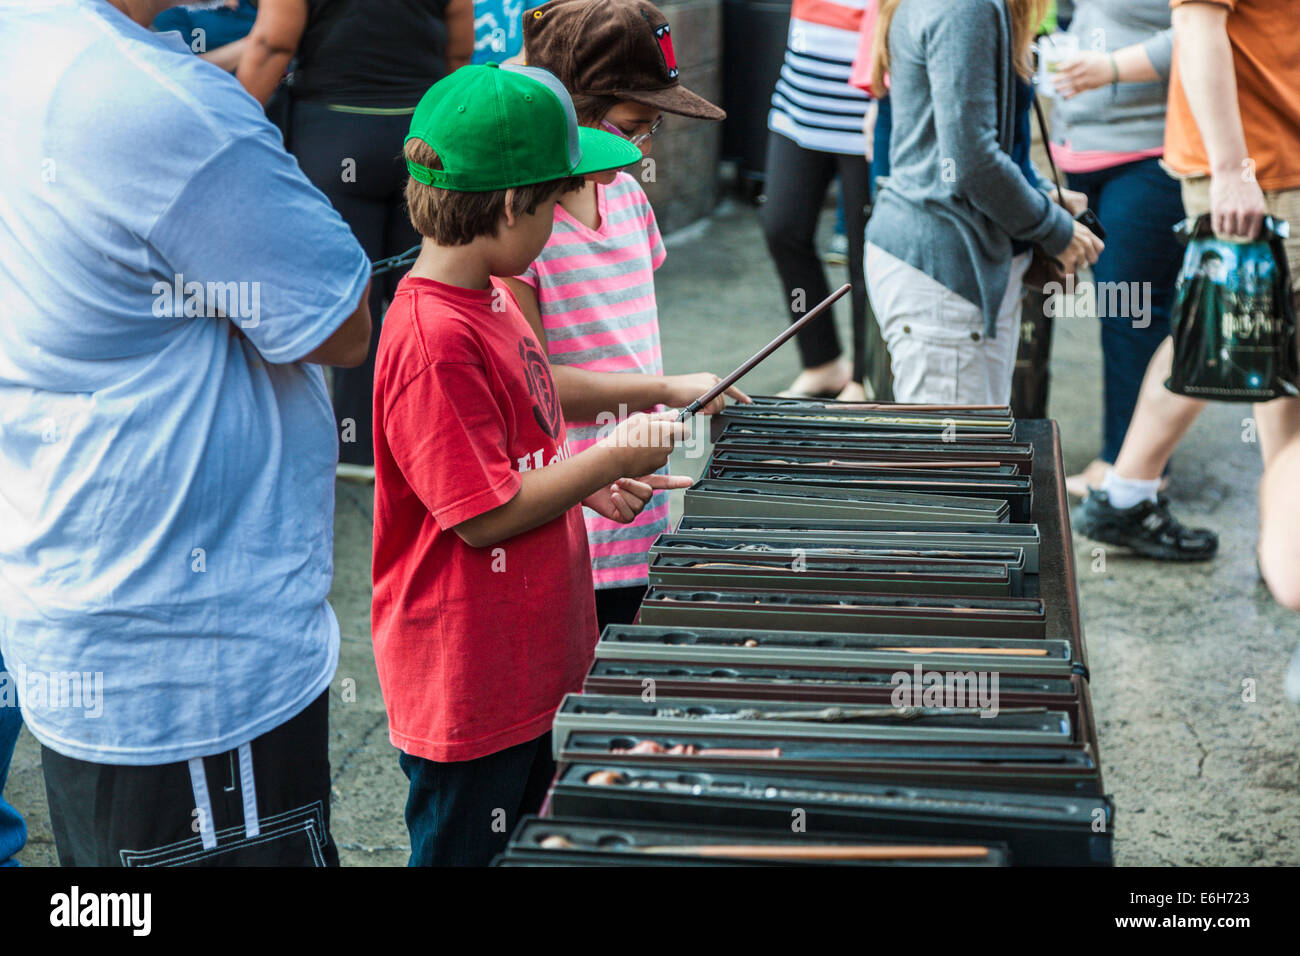 Young male child inspects magic wands for sale in The Wizarding World of Harry Potter at Universal Studios, Orlando, Florida Stock Photo